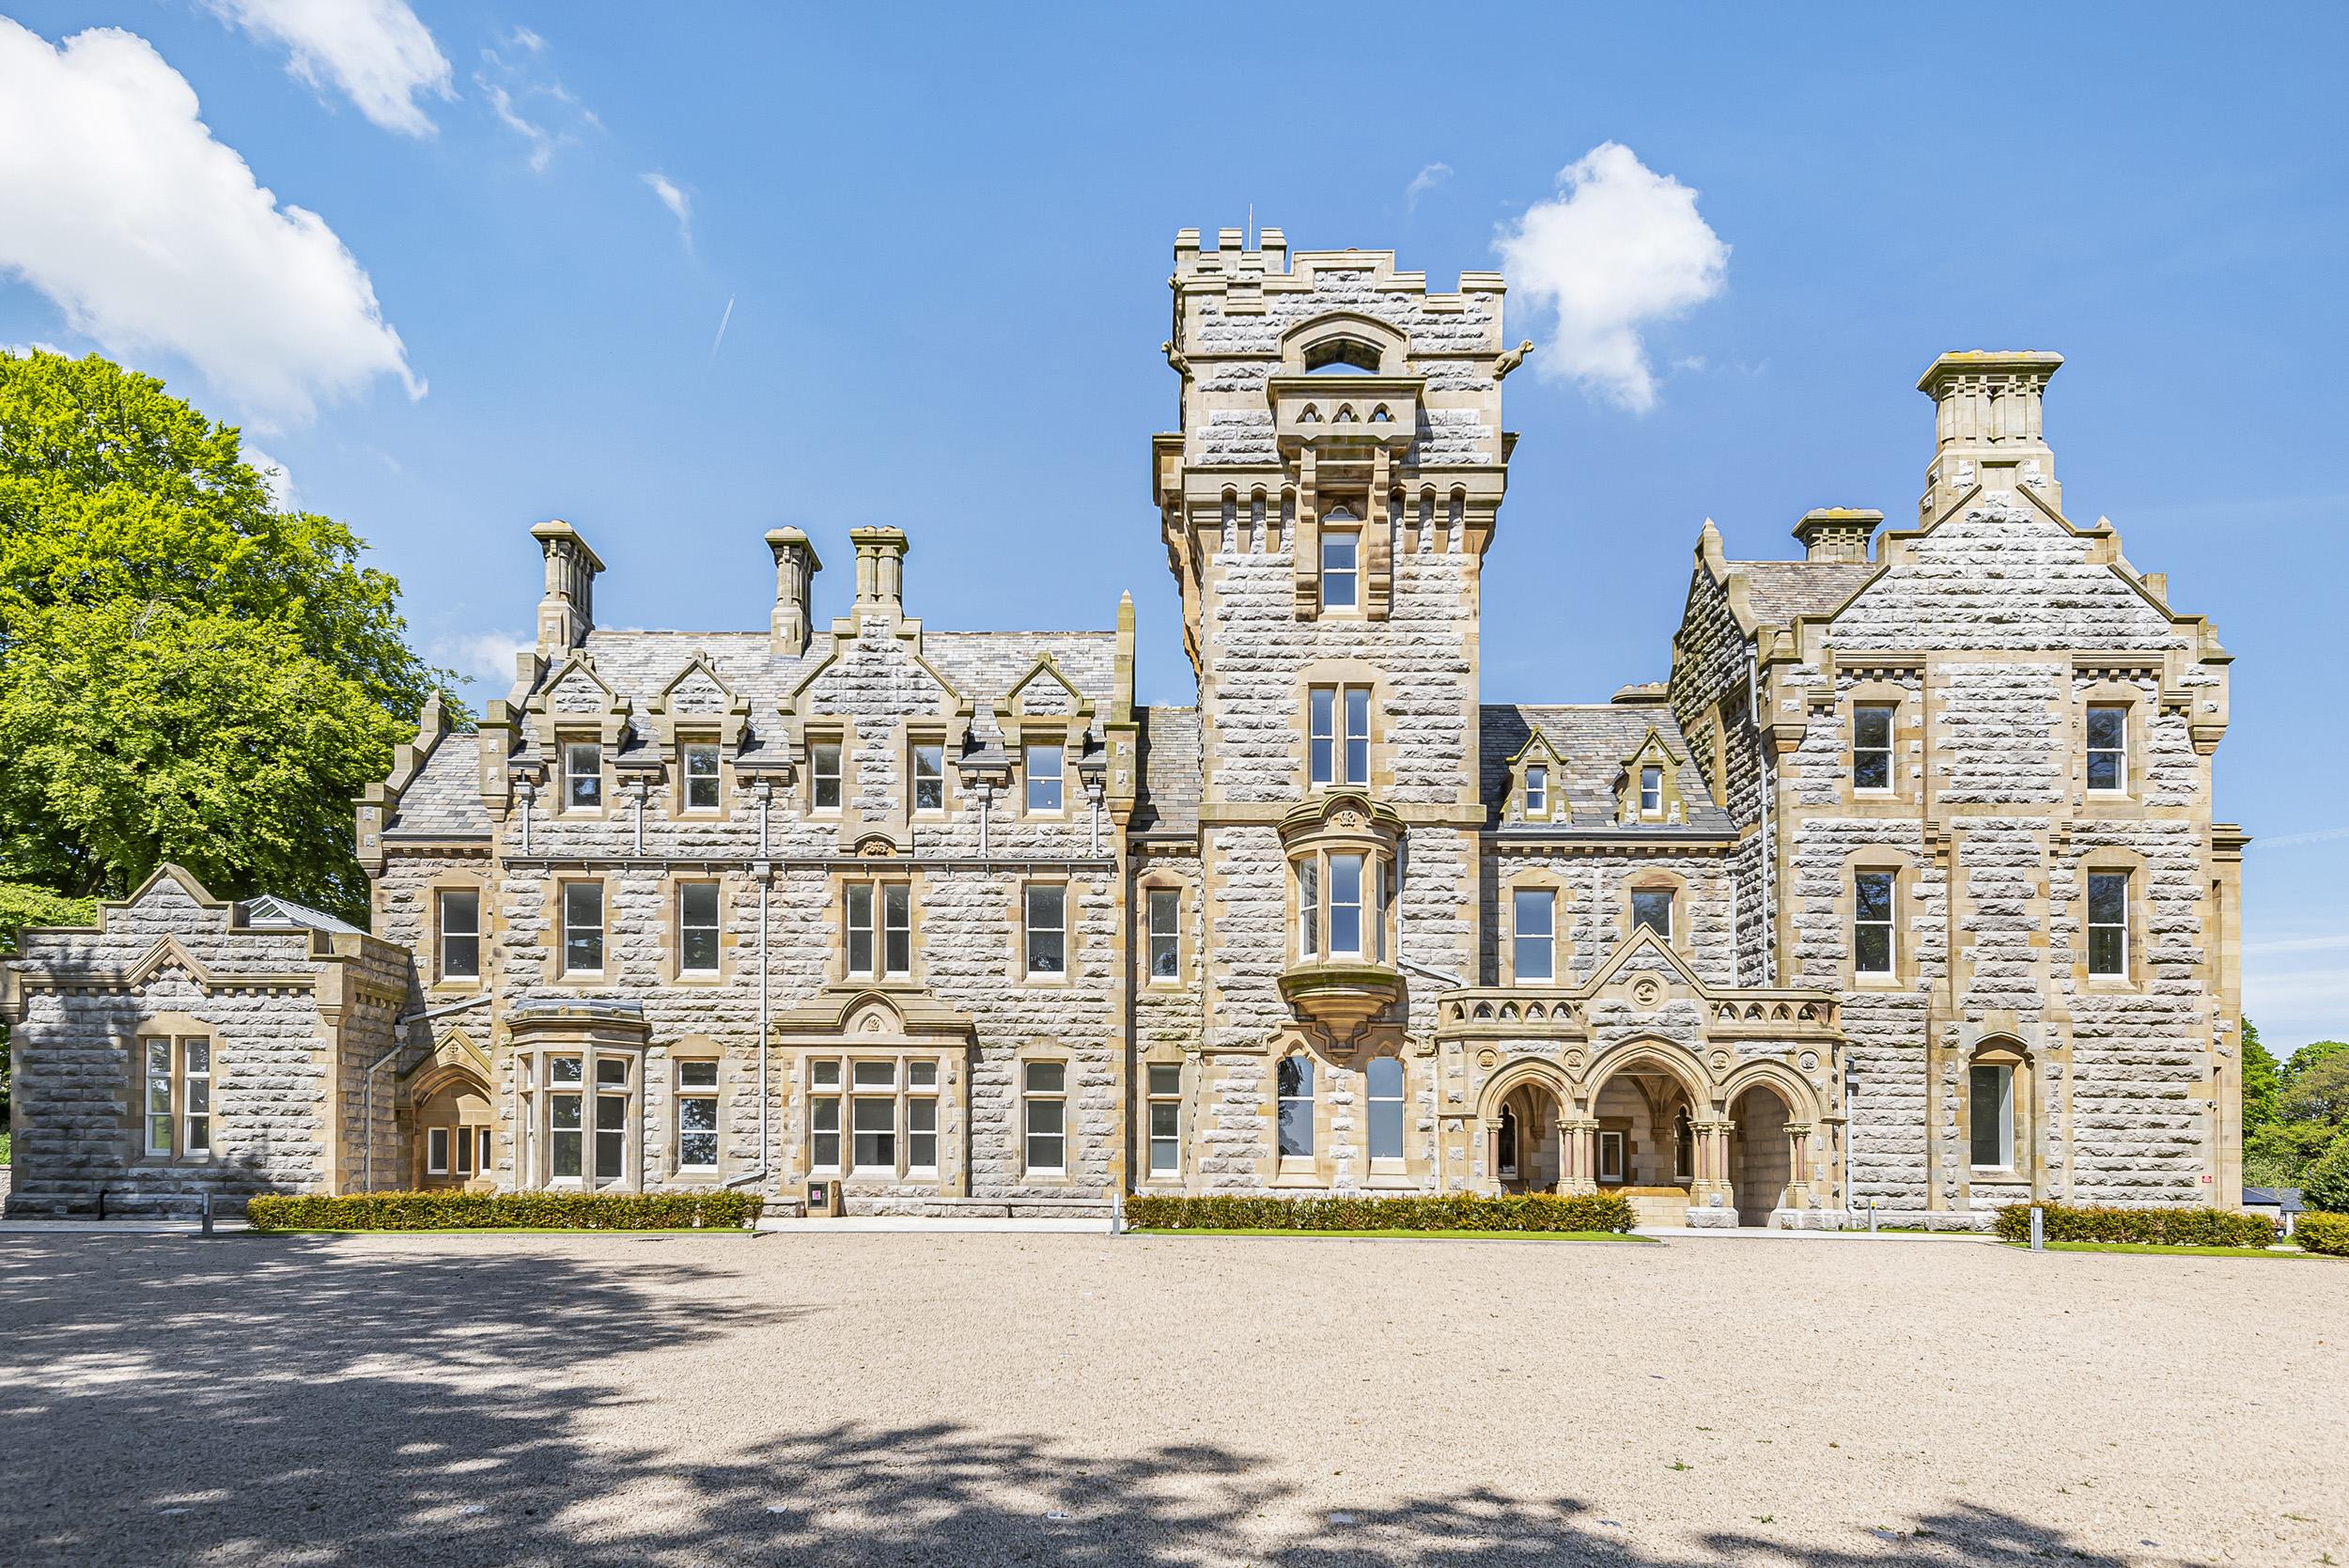 The Kathleen Suite Stone Cross Mansion